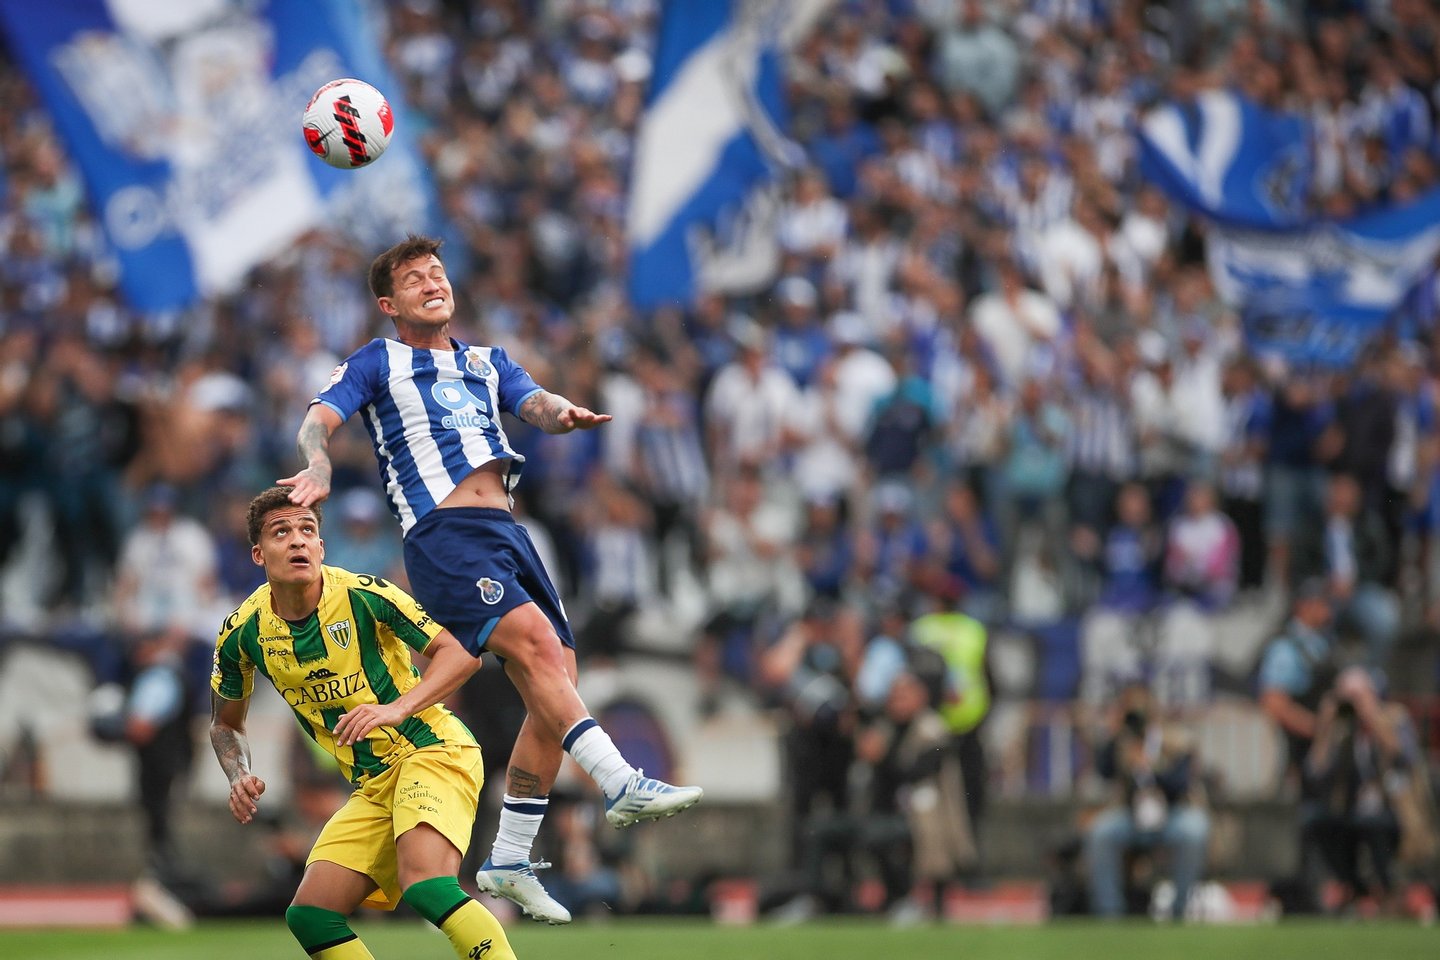 FC Porto's Otavio (R) fights for the ball with CD Tondela's Neto Borges (L) during the Portugal Cup final soccer match, between FC Porto and CD Tondela, at Jamor National stadium in Oeiras, outskirts of Lisbon, Portugal, 22 May 2022. MARIO CRUZ/LUSA